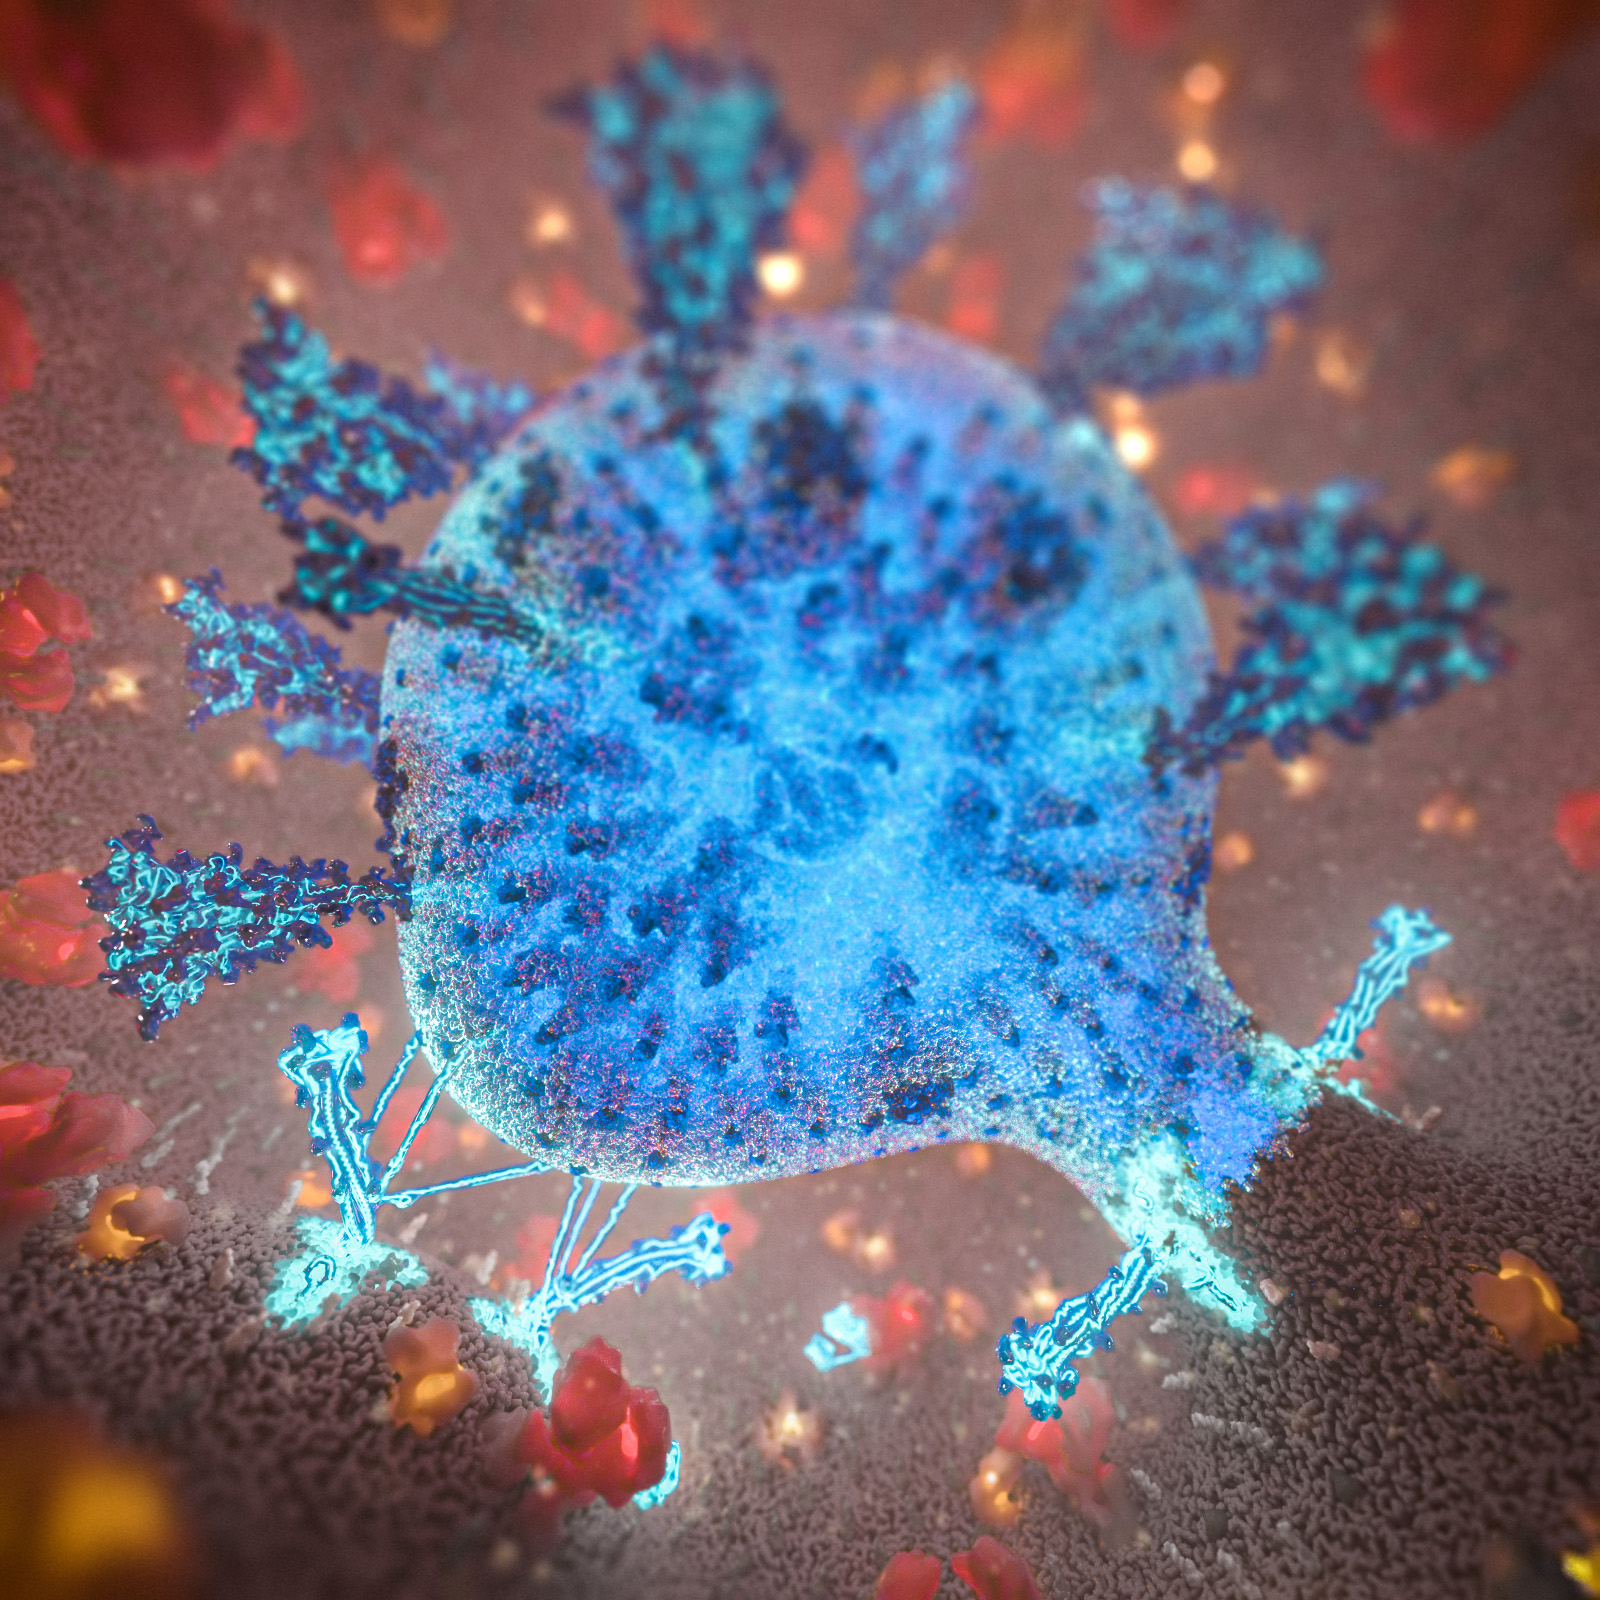 A blue glowing virus is enveloped inside a vesicle, where it merges its membrane with host cell. The genetic information of the virus can be seen through the glass-like membrane. Host cell proteins are glowing in warm colors.